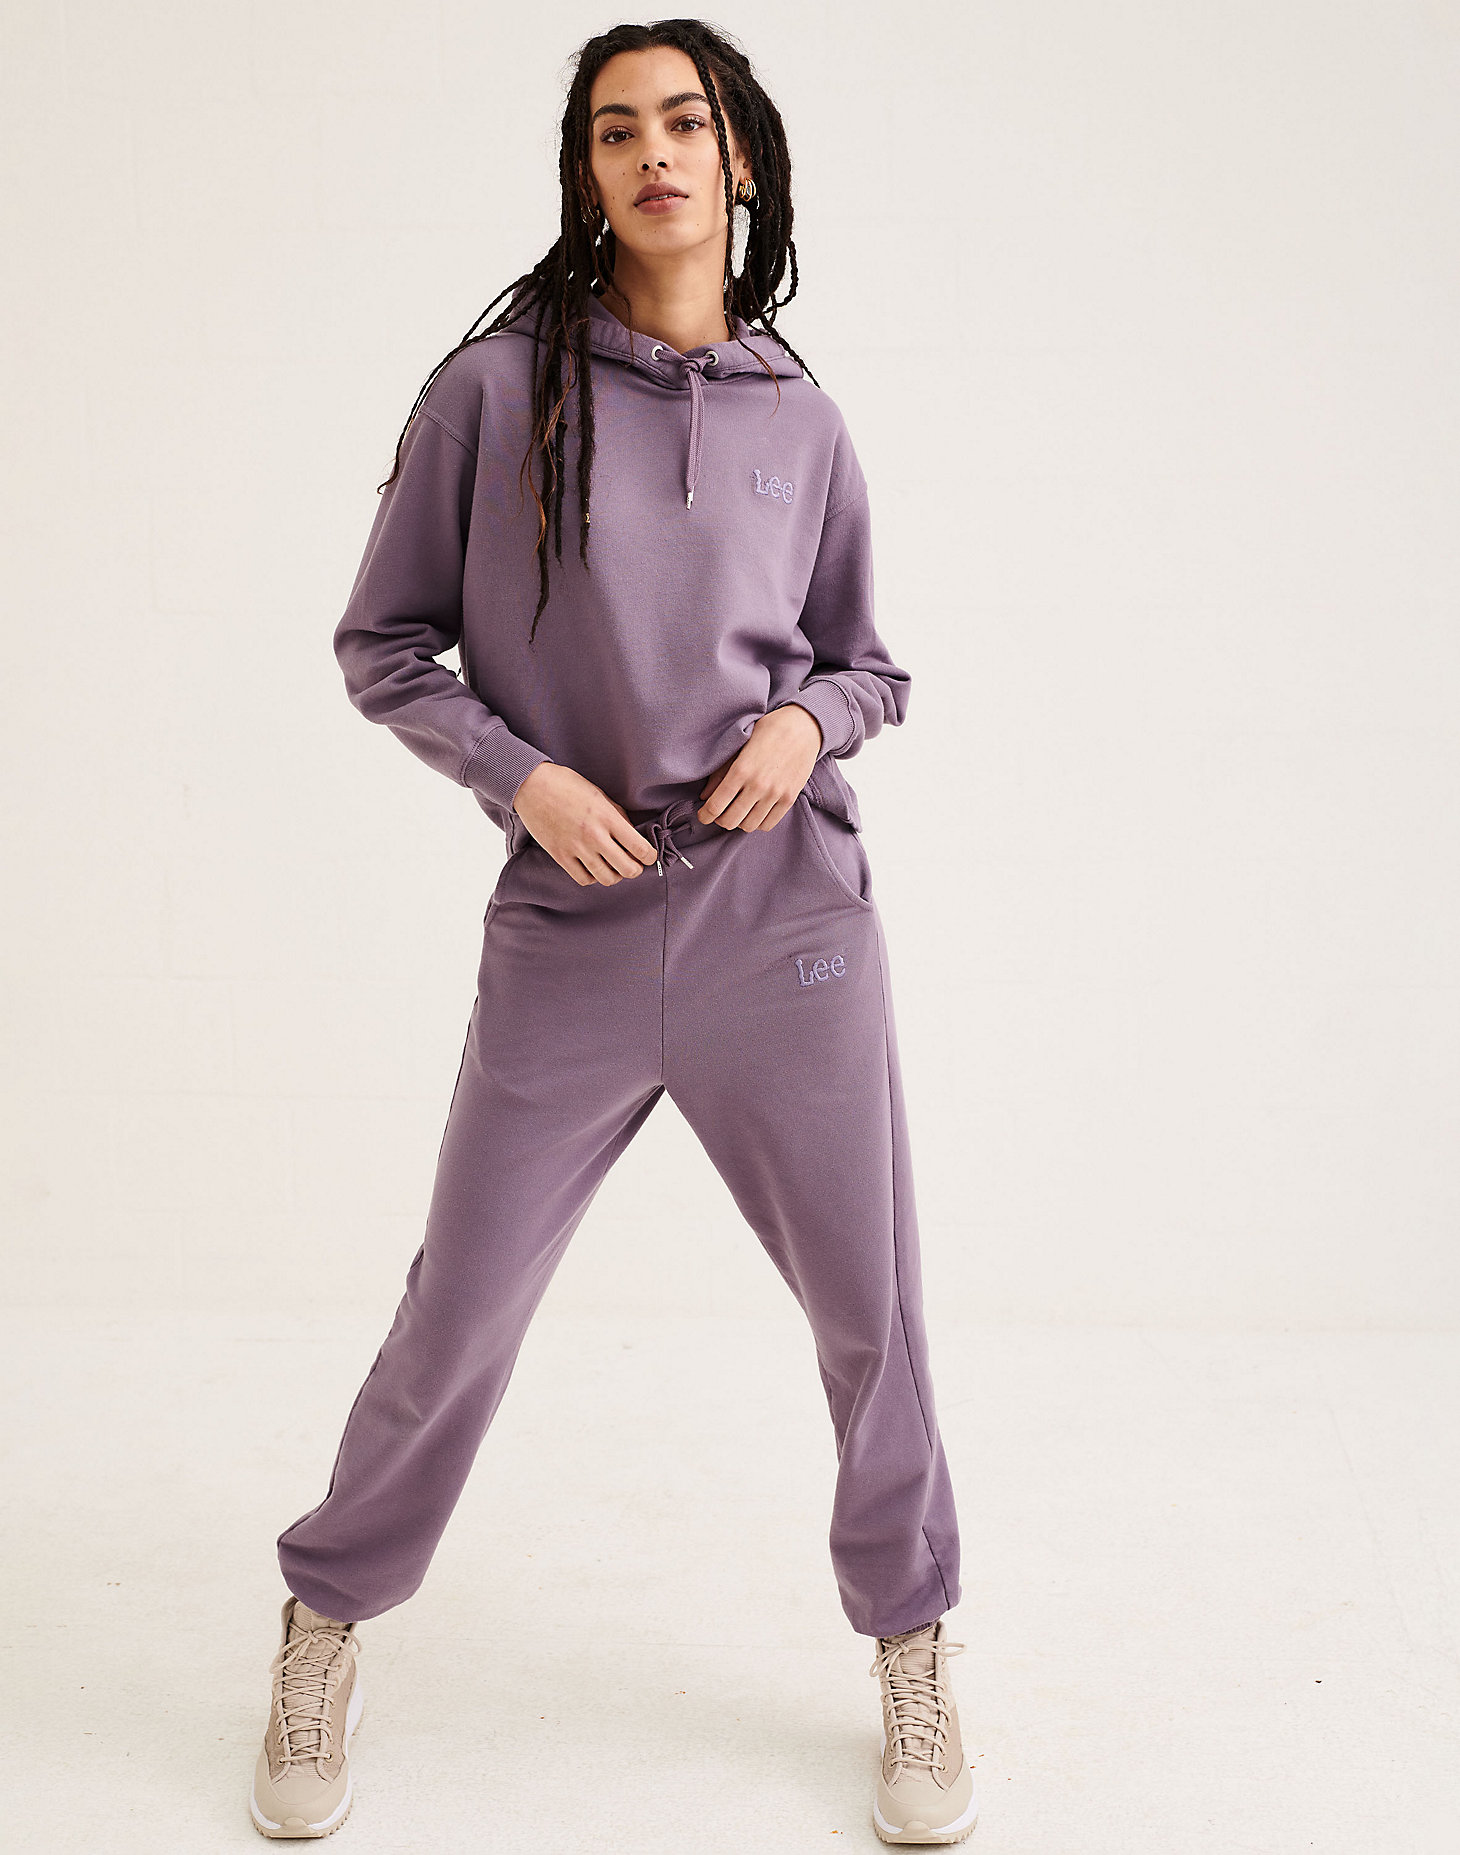 Relaxed Sweatpants in Washed Purple alternative view 1